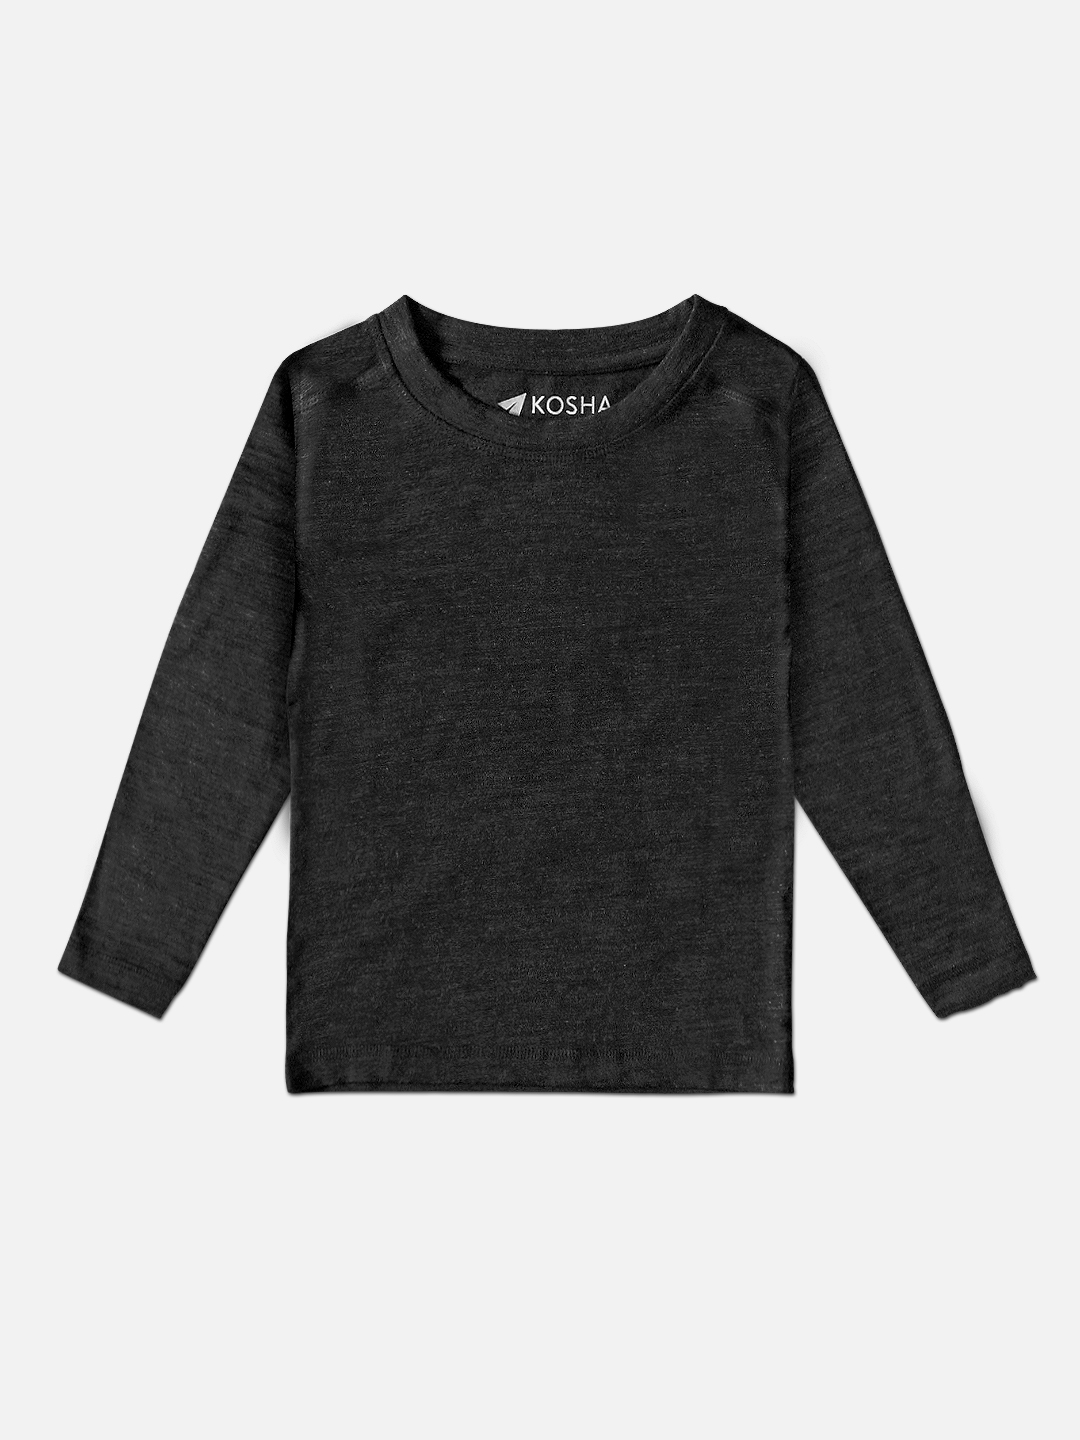 Charcoal Merino Wool and Bamboo Full Sleeves Thermal Top| Unisex 